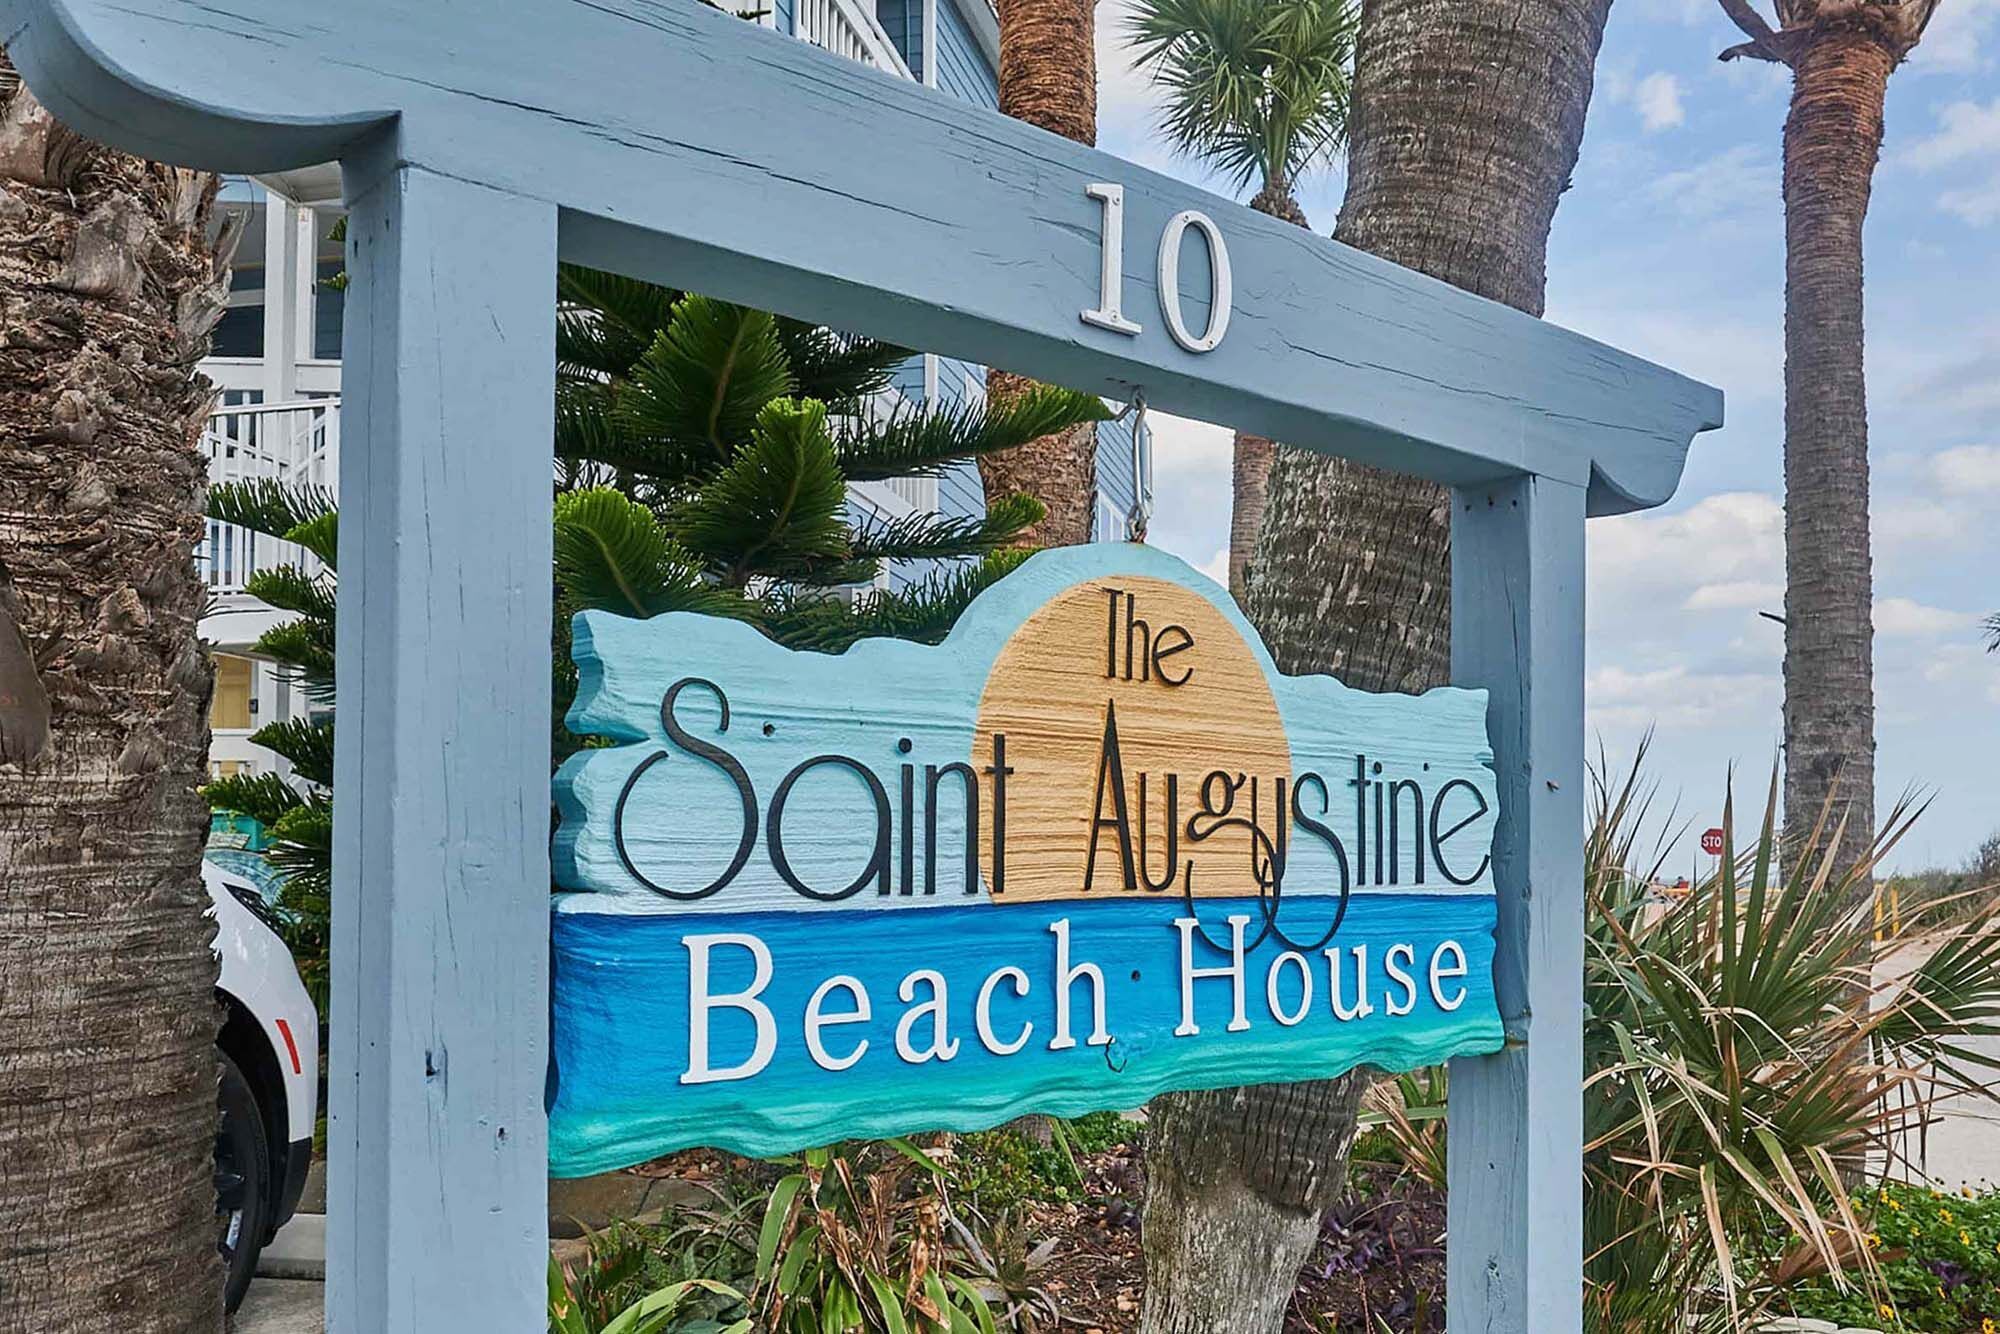 The most popular hotels in St. Augustine: offers you will not want to miss